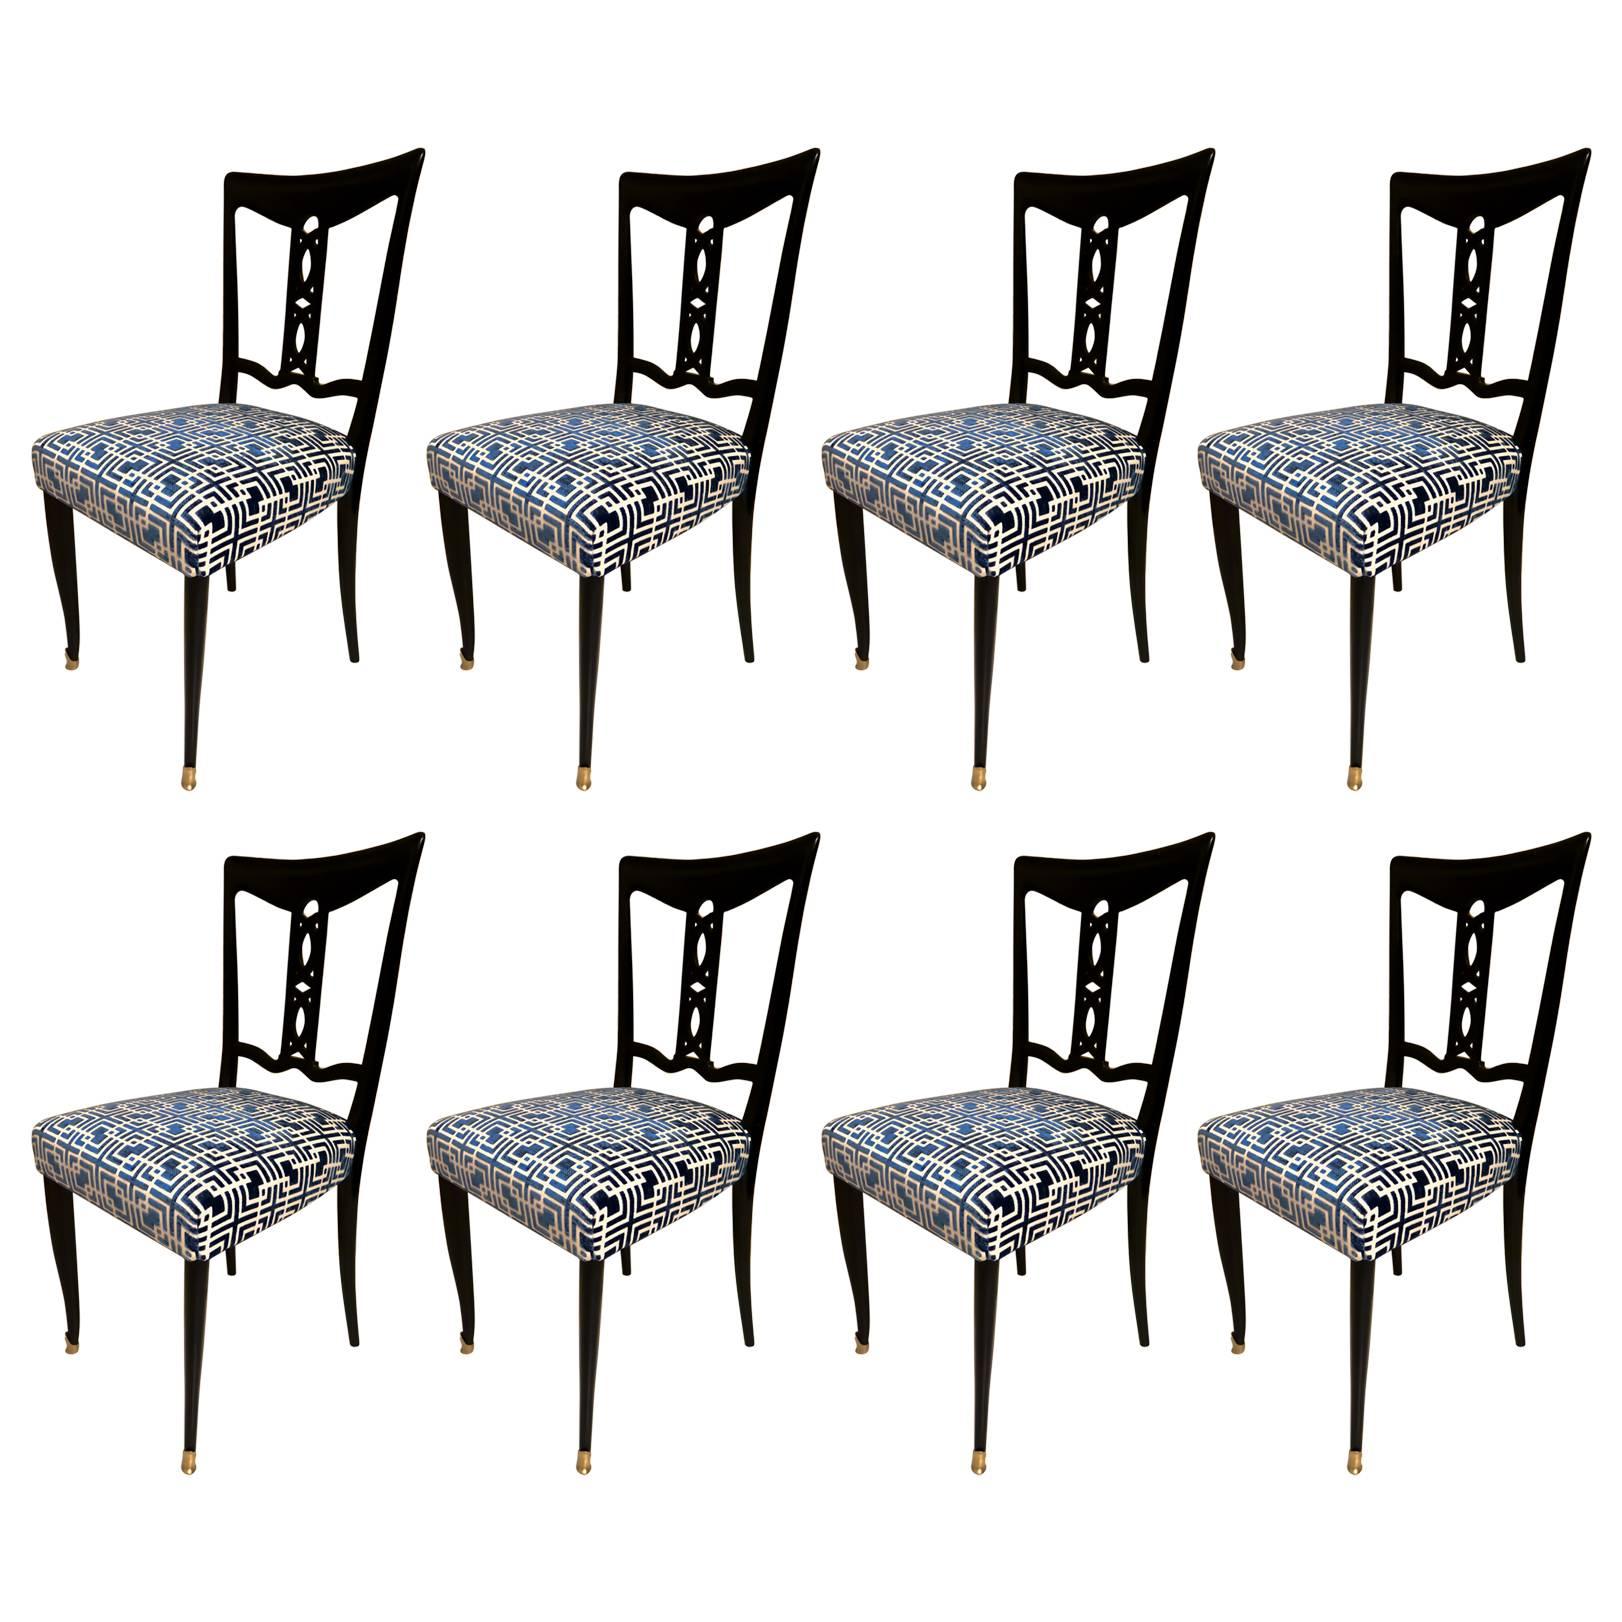 Eight Chairs in the style of Ico Parisi, possibly made by Dassi, circa 1955